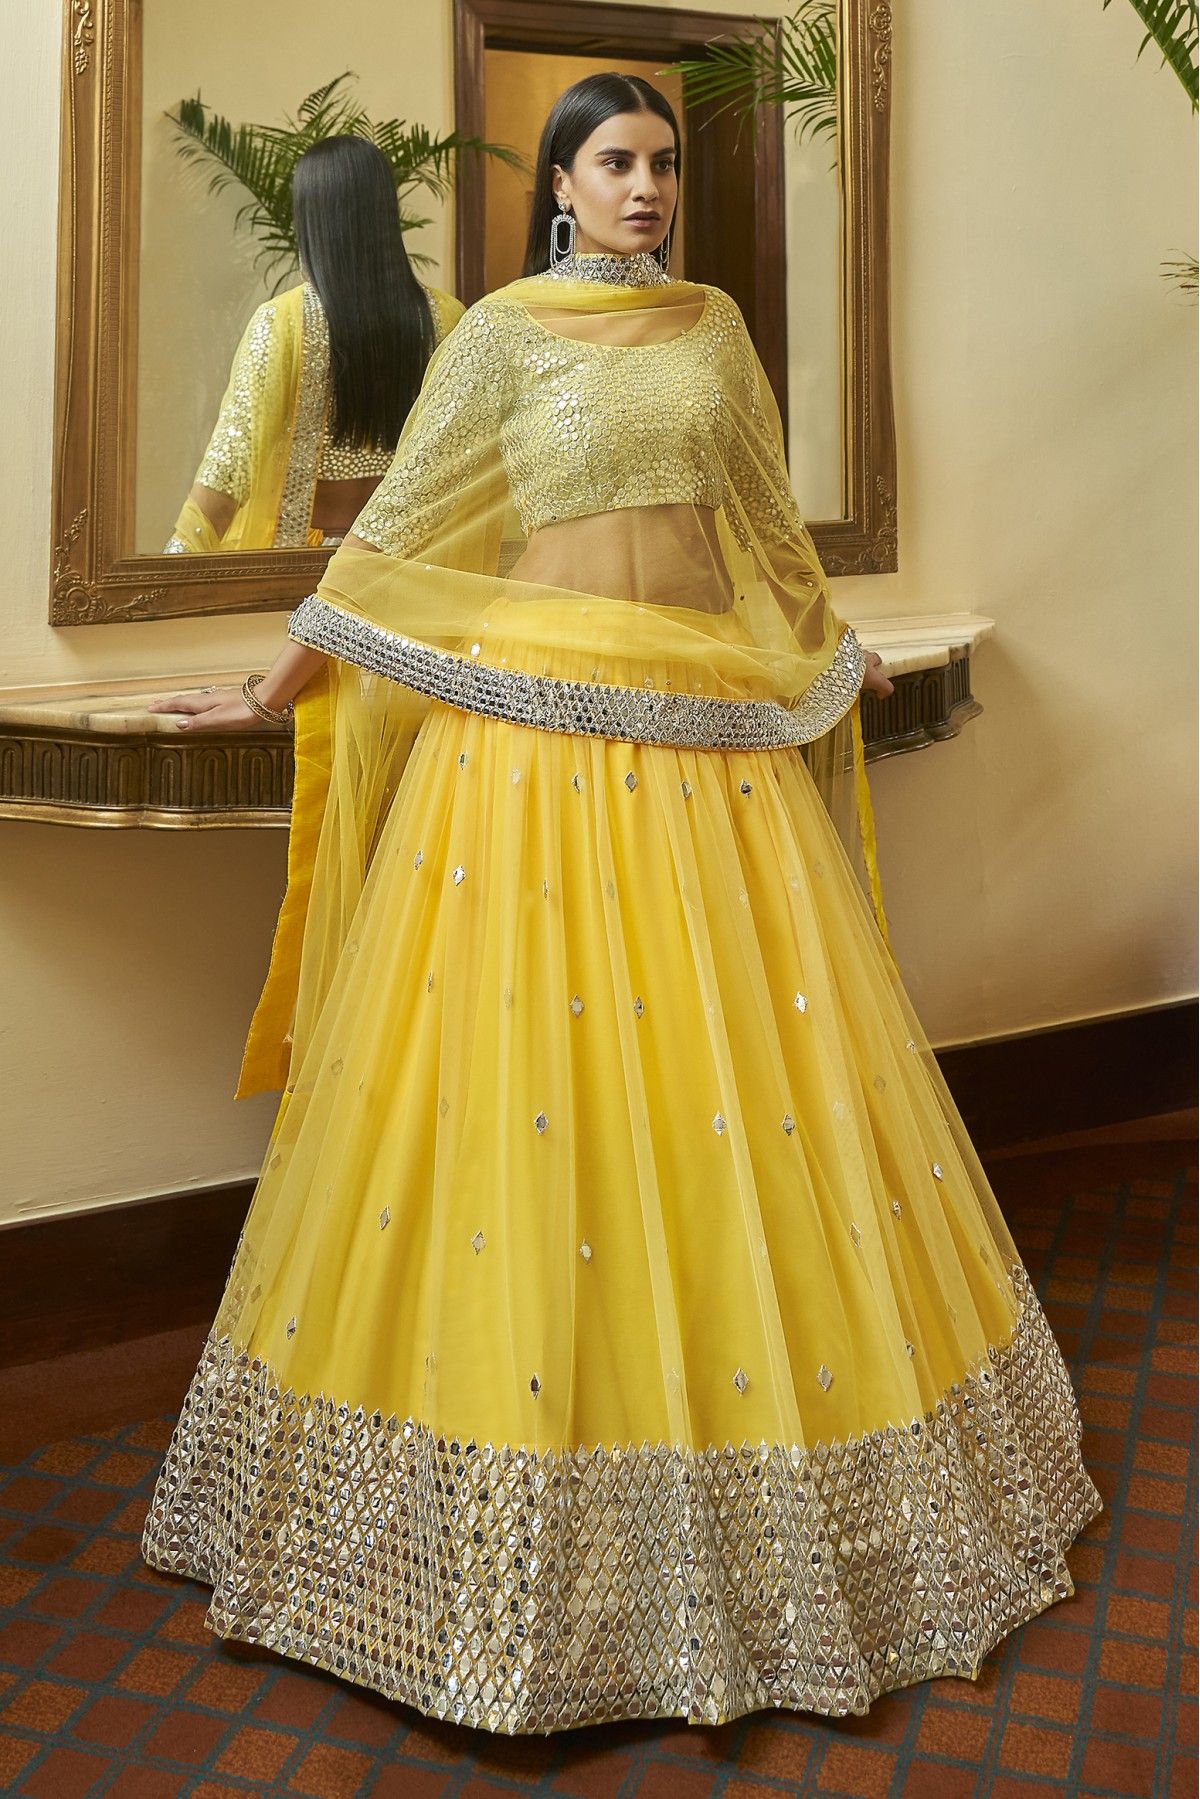 Buy kids fancy white embroidery design yellow color lehenga choli for baby  girls (3-4 Years, yellow) at Amazon.in